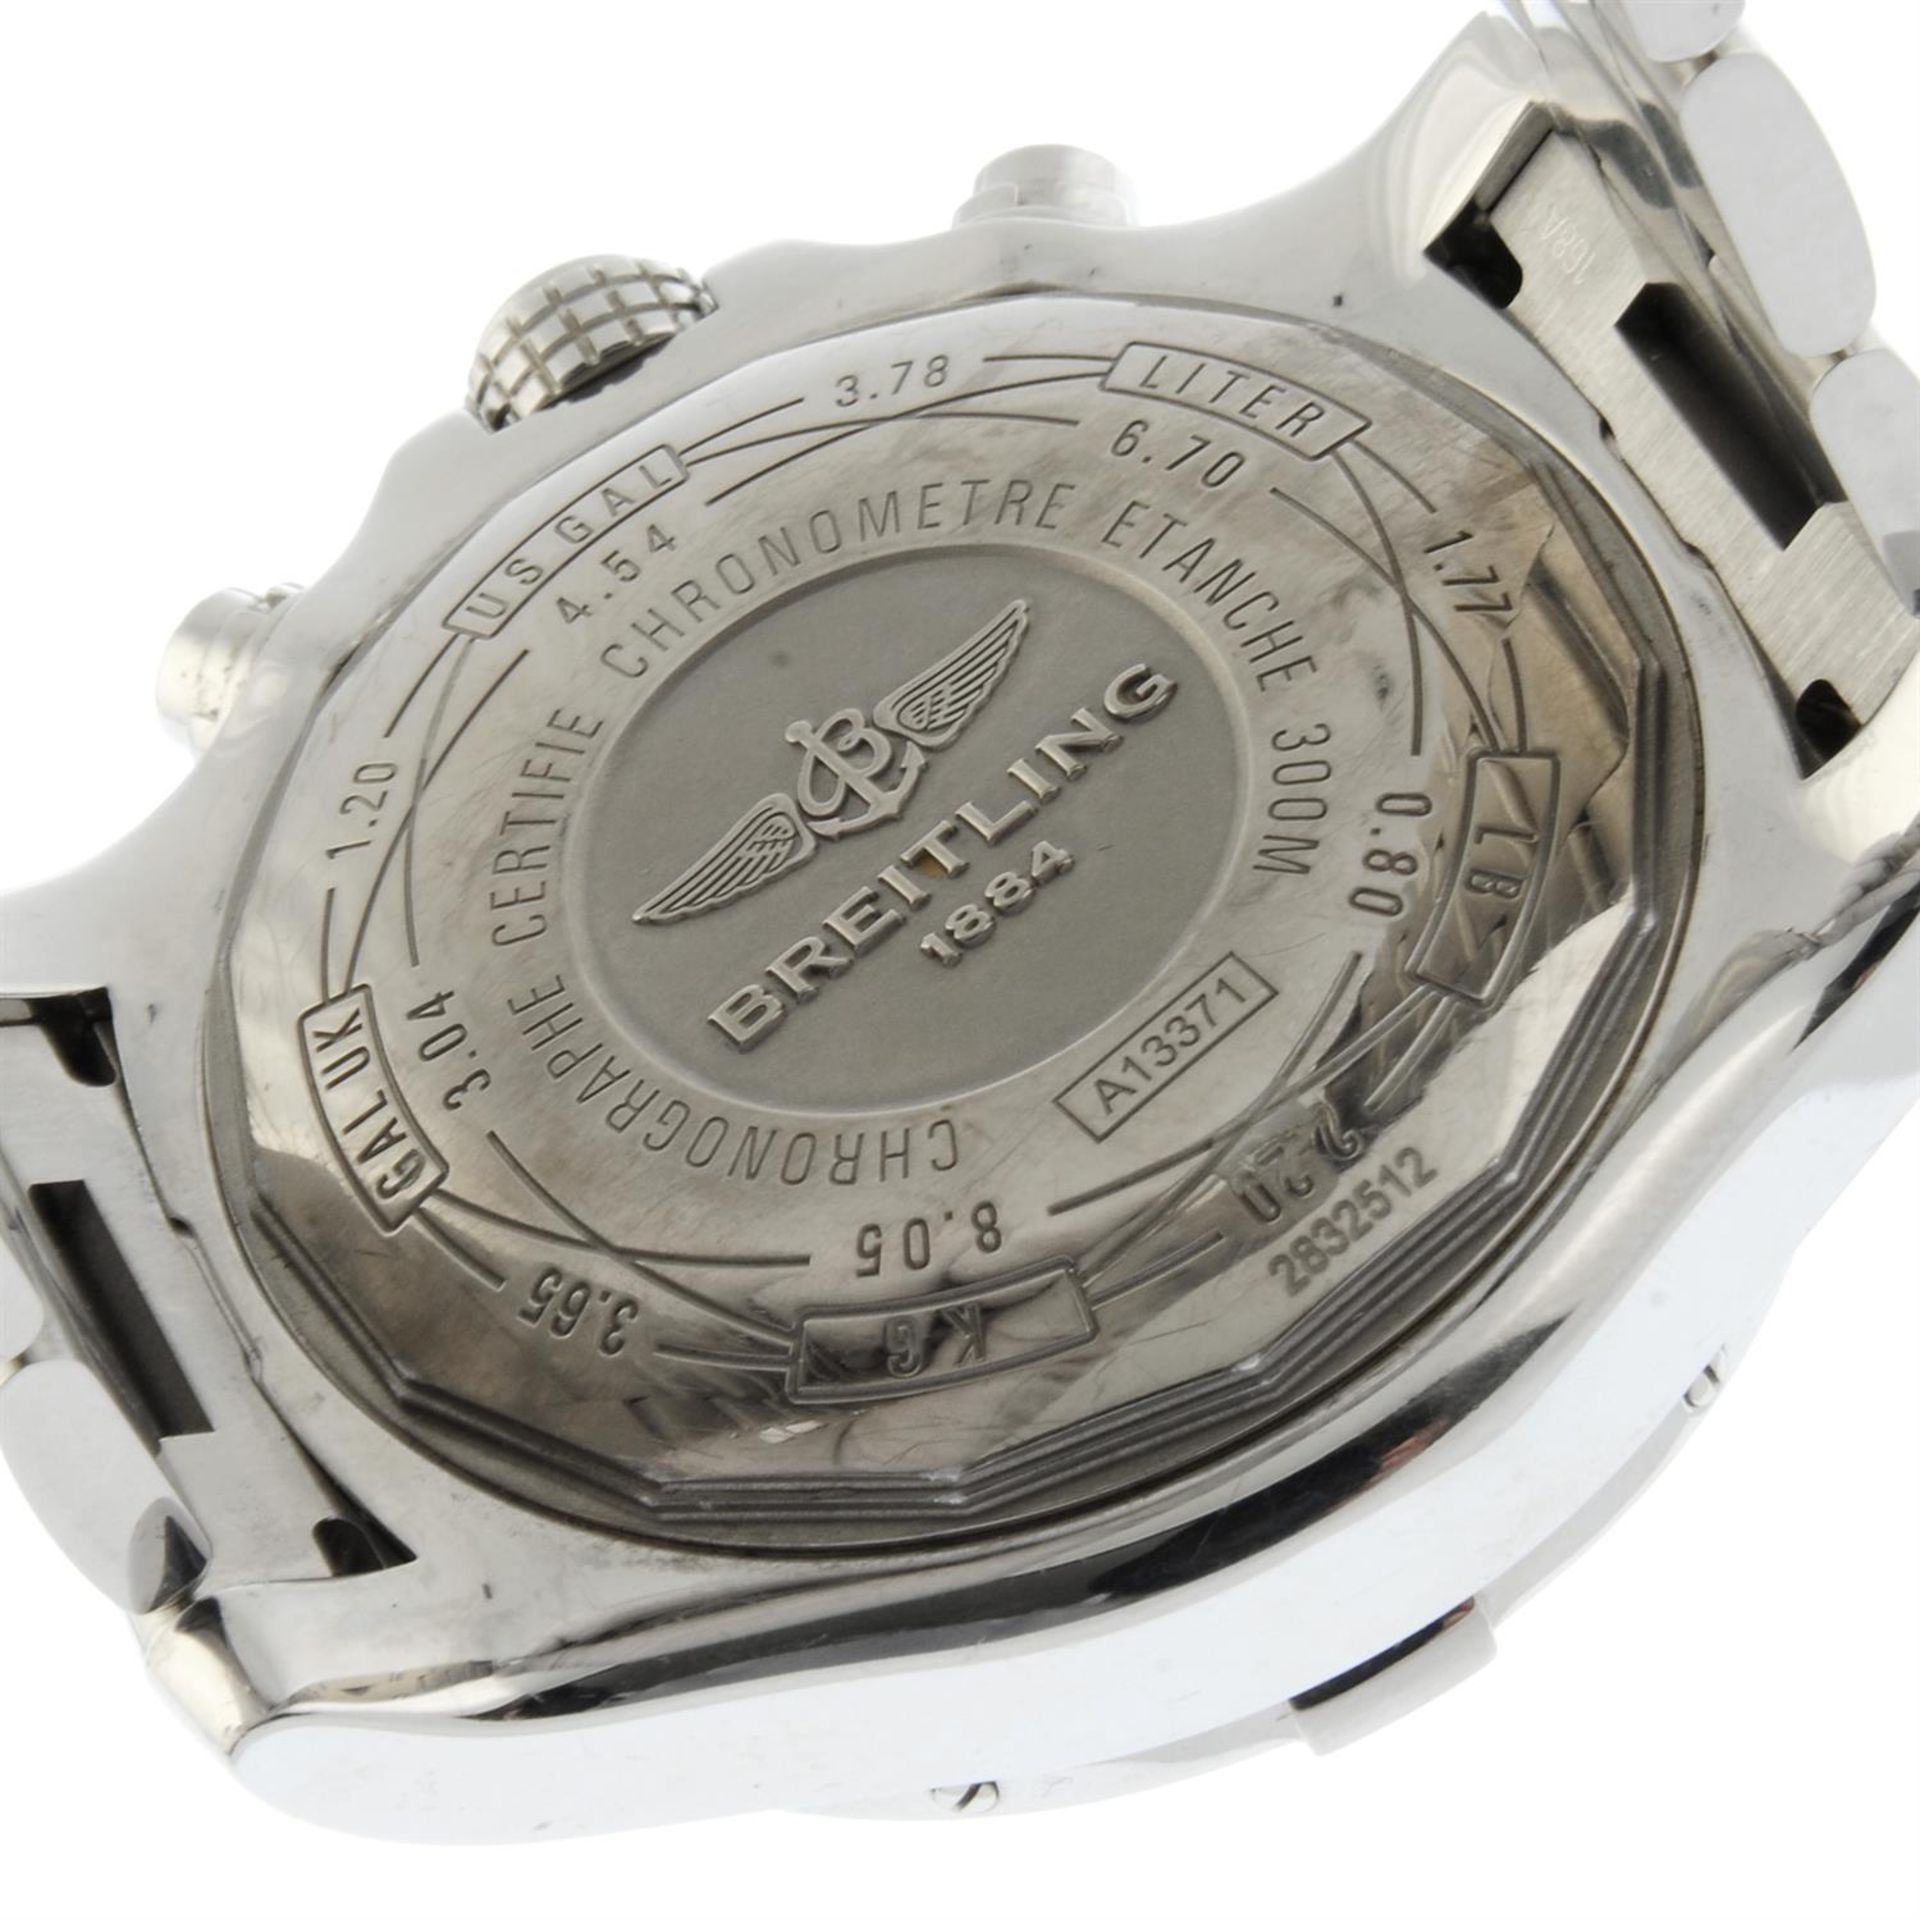 Breitling - a Super Avenger II chronograph watch, 48mm. - Image 5 of 7